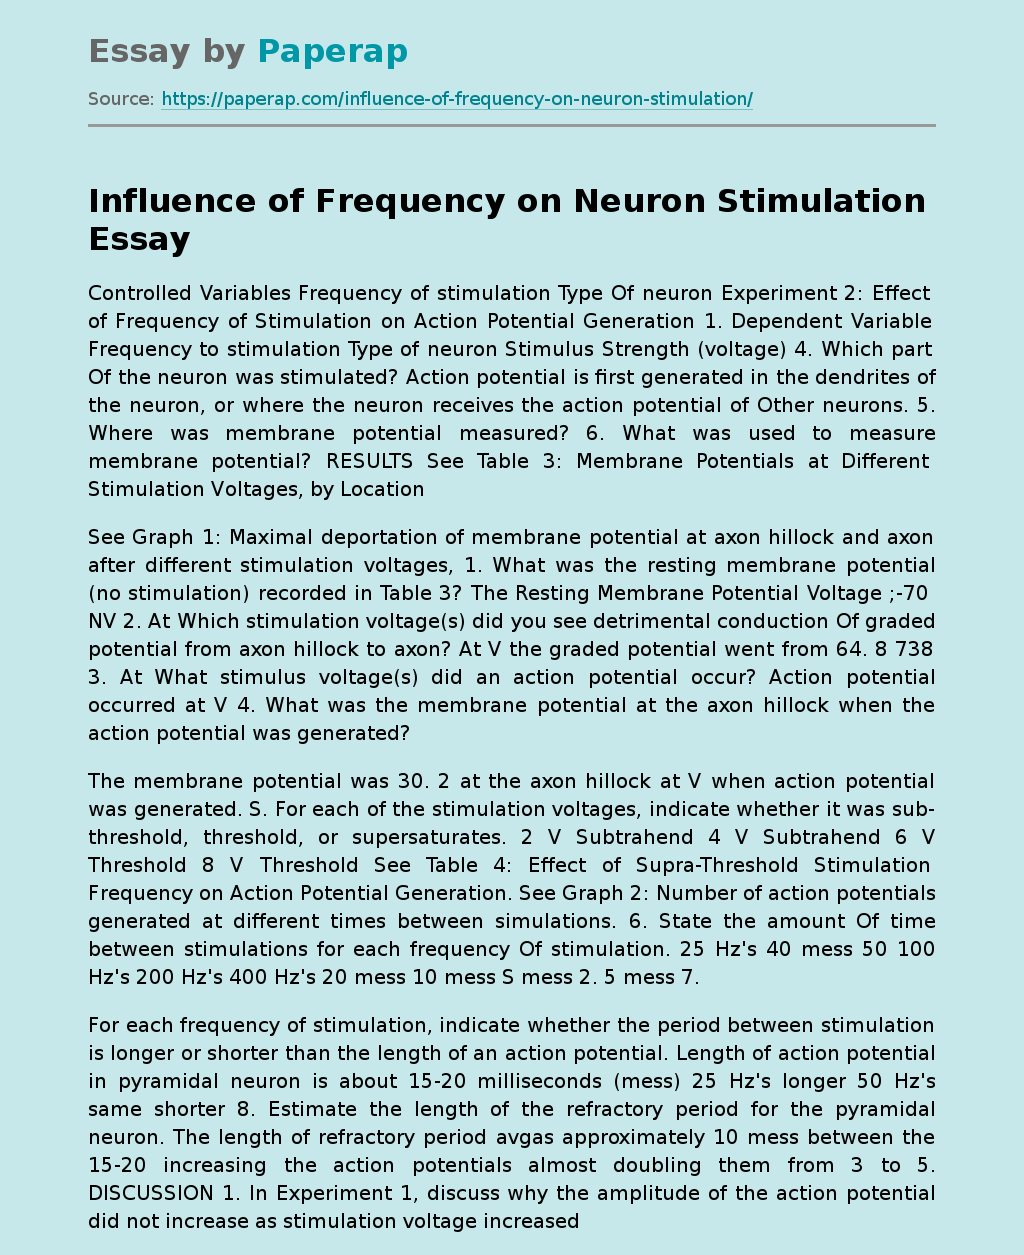 Influence of Frequency on Neuron Stimulation